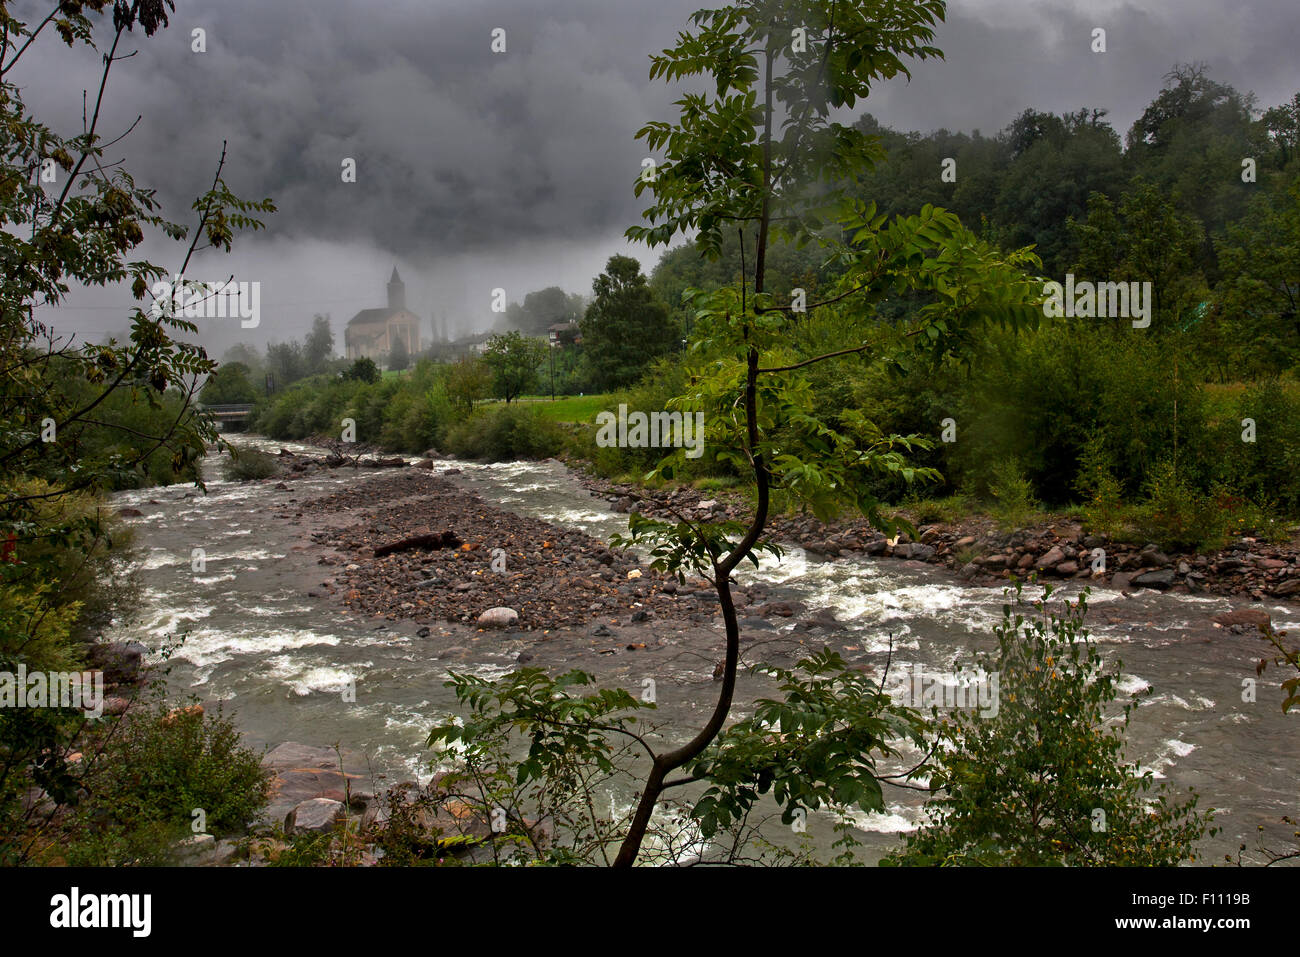 View of the river and church of Chironico on a wet, misty day. Stock Photo